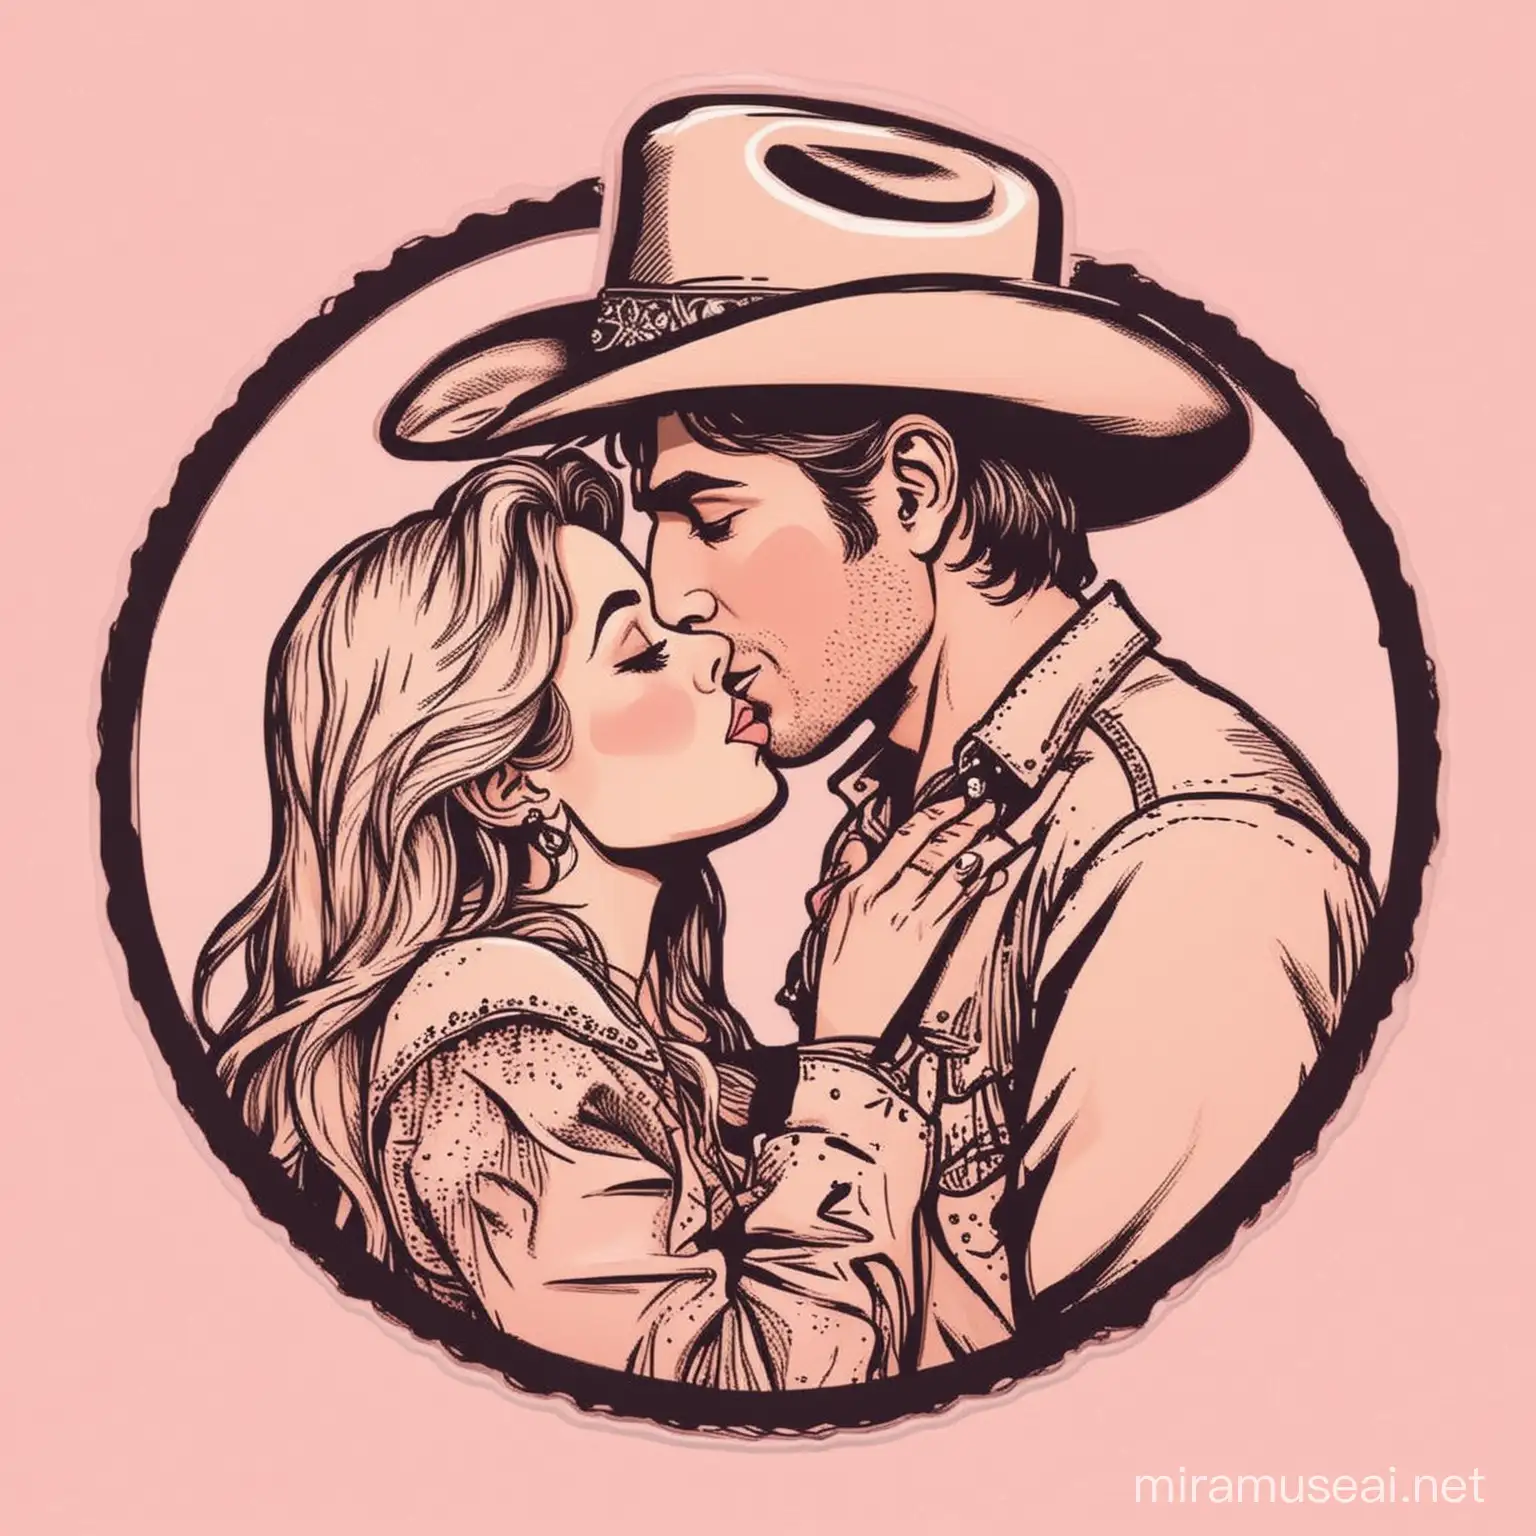 A higher quality vector illustration sticker of cowboy Romance couple kissing, black outline border, light pink background 